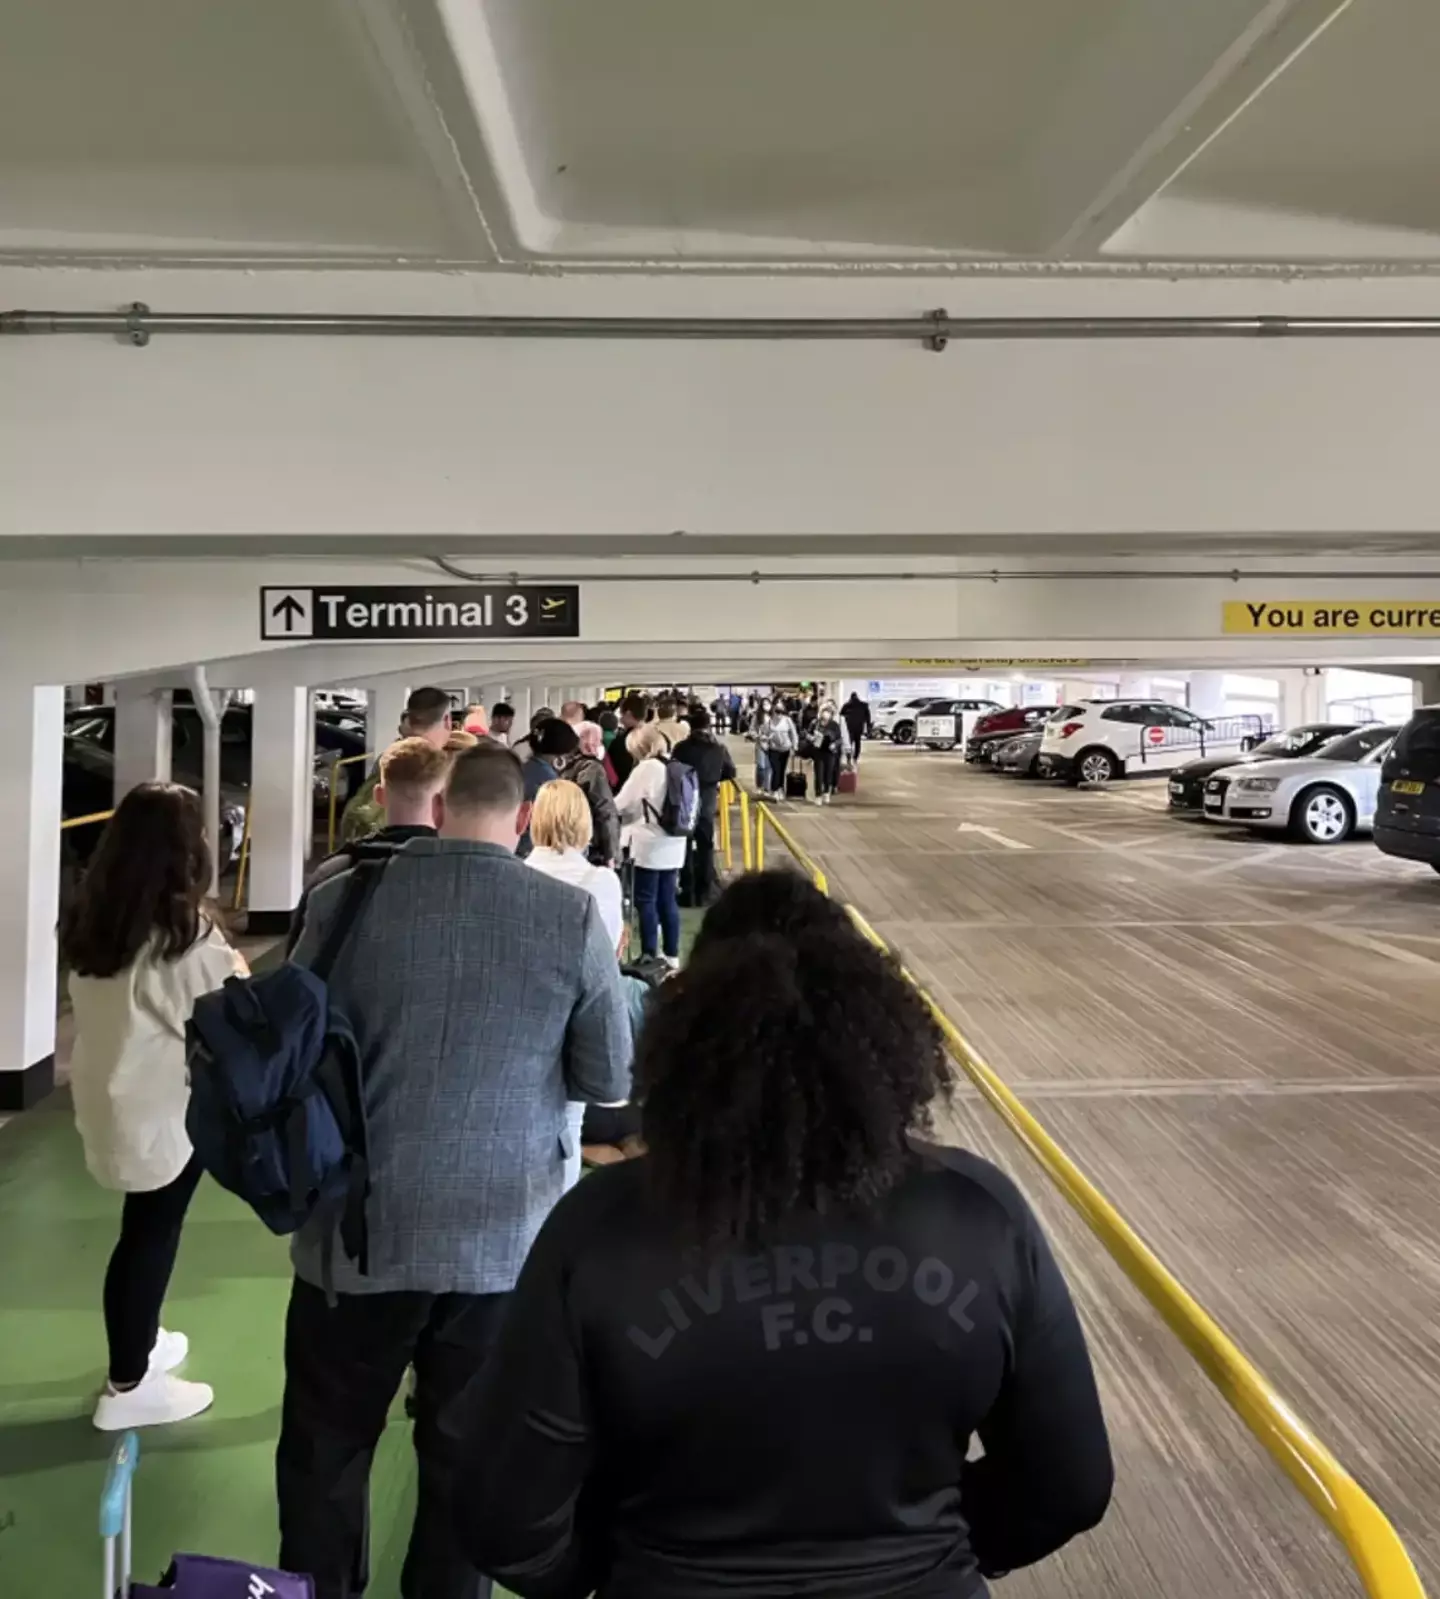 Last month pictures emerged of queues at Manchester Airport snaking into the carpark.